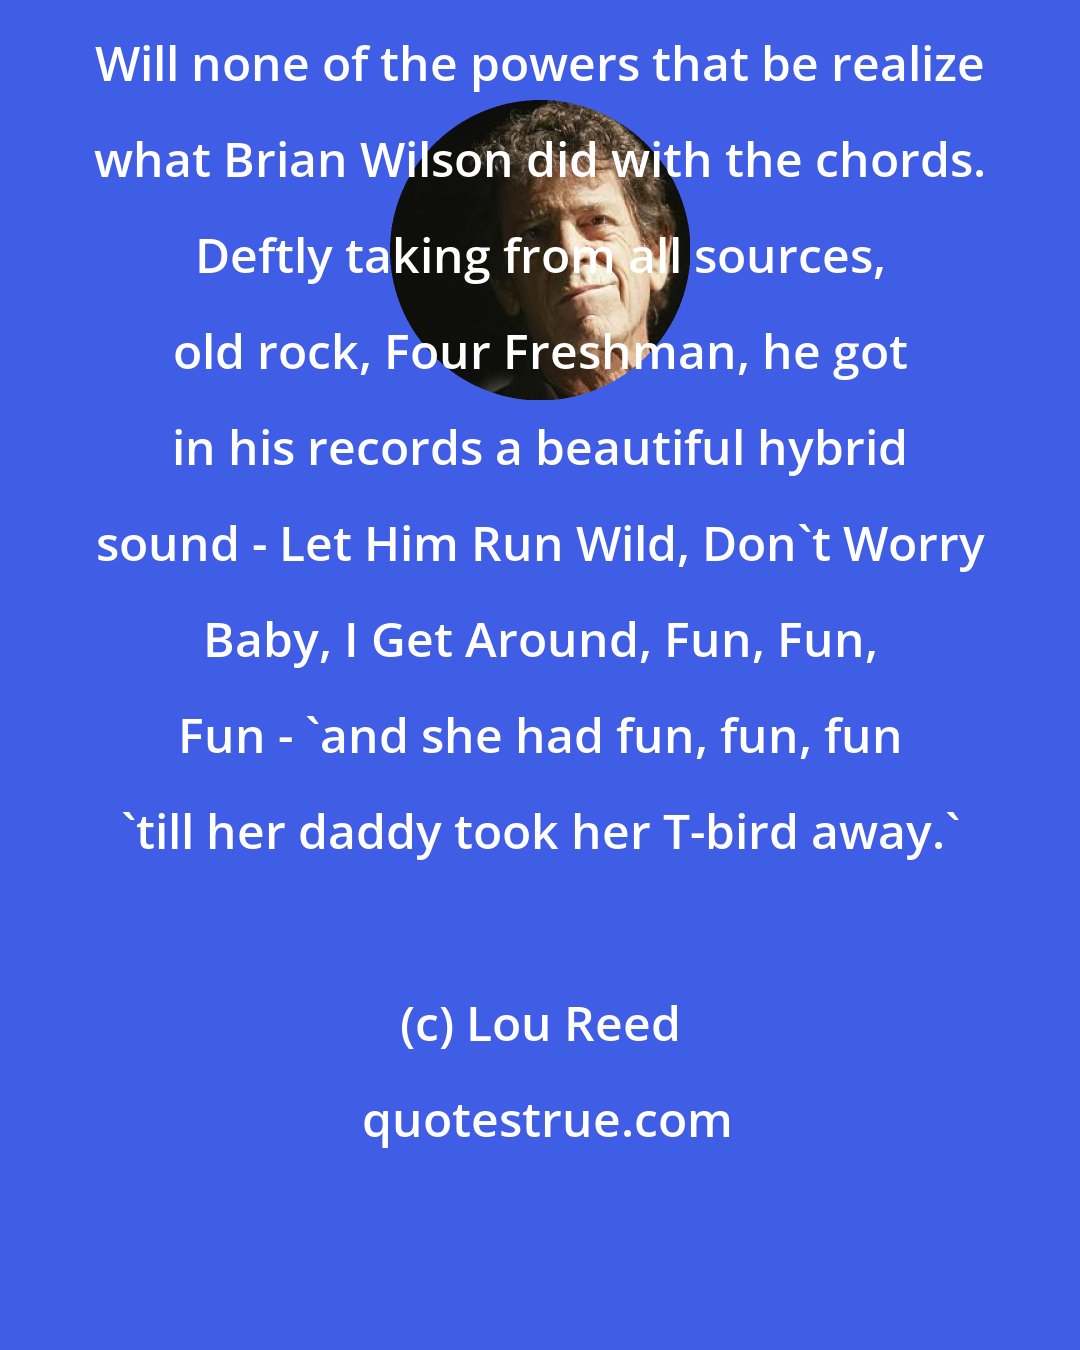 Lou Reed: Will none of the powers that be realize what Brian Wilson did with the chords. Deftly taking from all sources, old rock, Four Freshman, he got in his records a beautiful hybrid sound - Let Him Run Wild, Don't Worry Baby, I Get Around, Fun, Fun, Fun - 'and she had fun, fun, fun 'till her daddy took her T-bird away.'